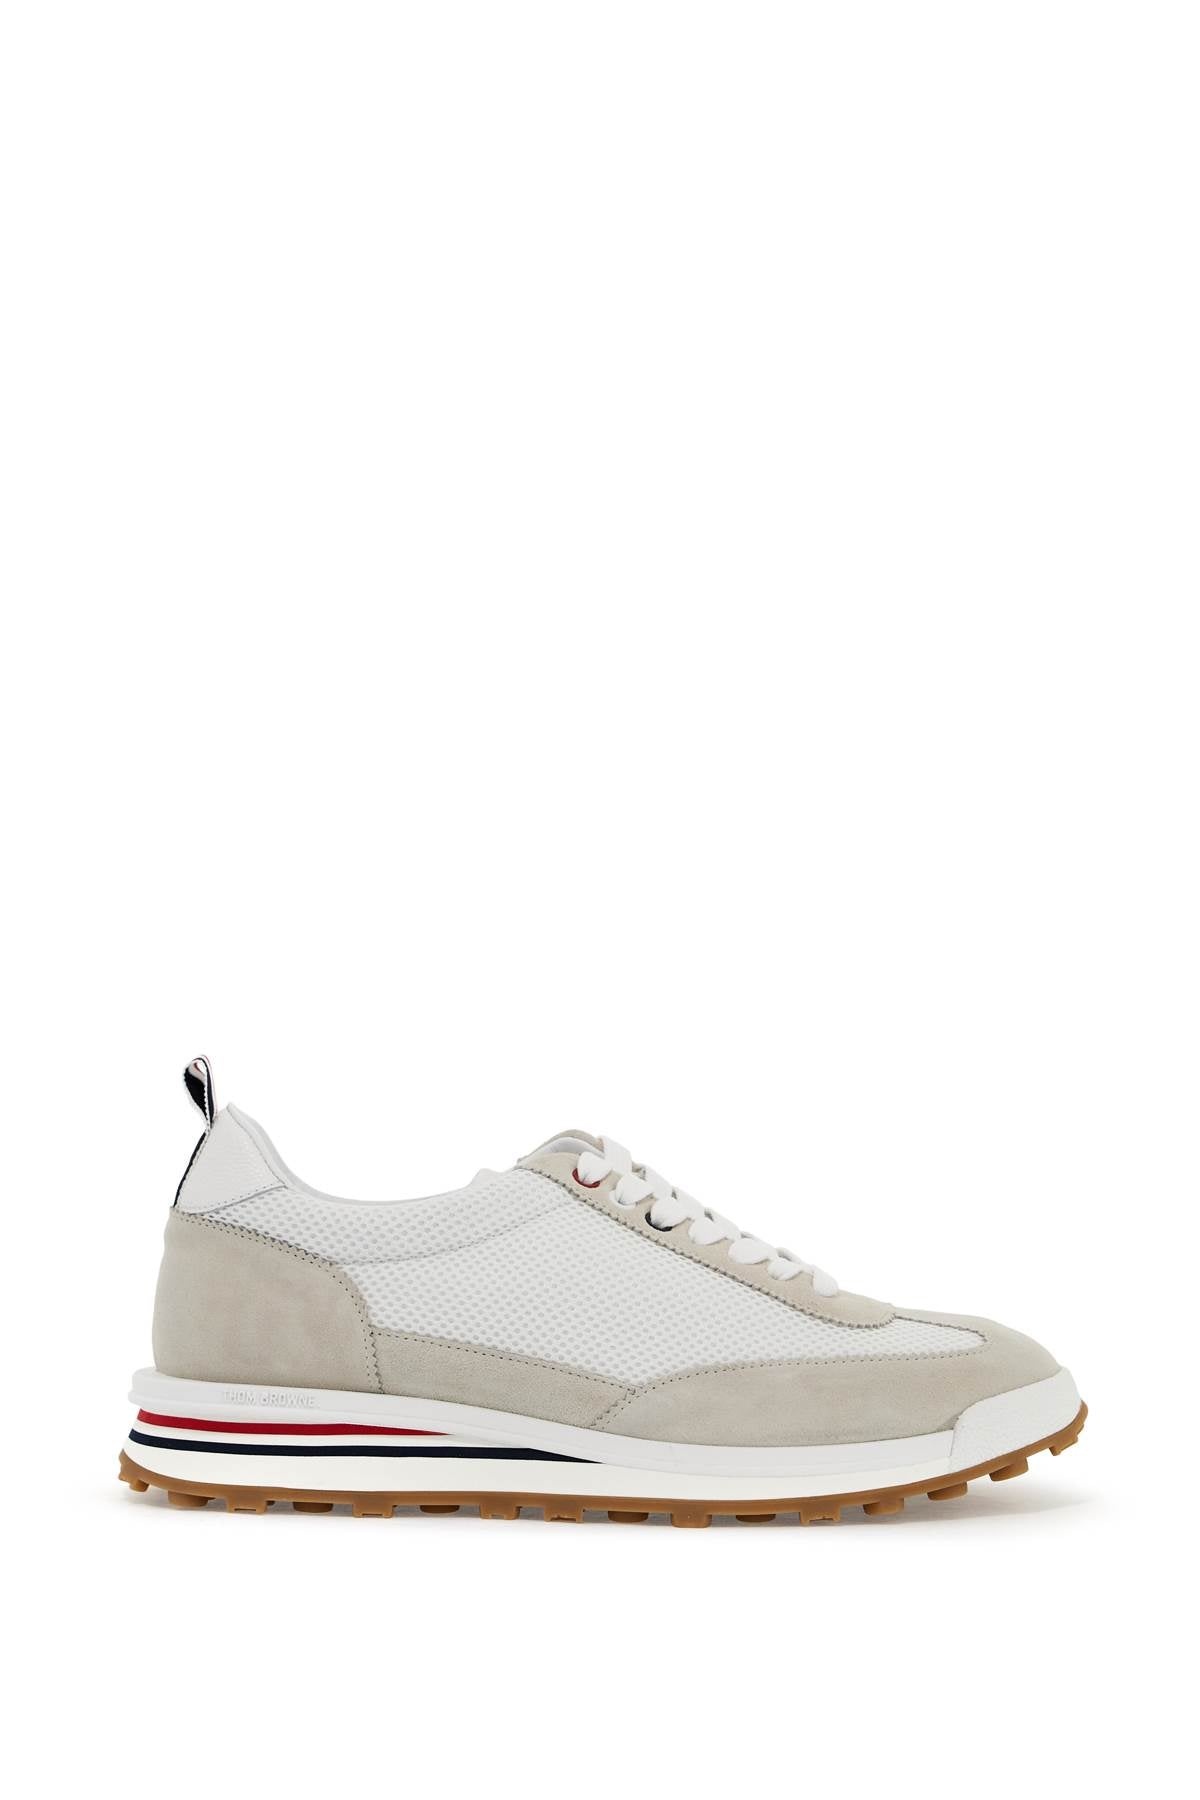 Thom Browne Mesh And Suede Leather Sneakers In 9 Men - 1